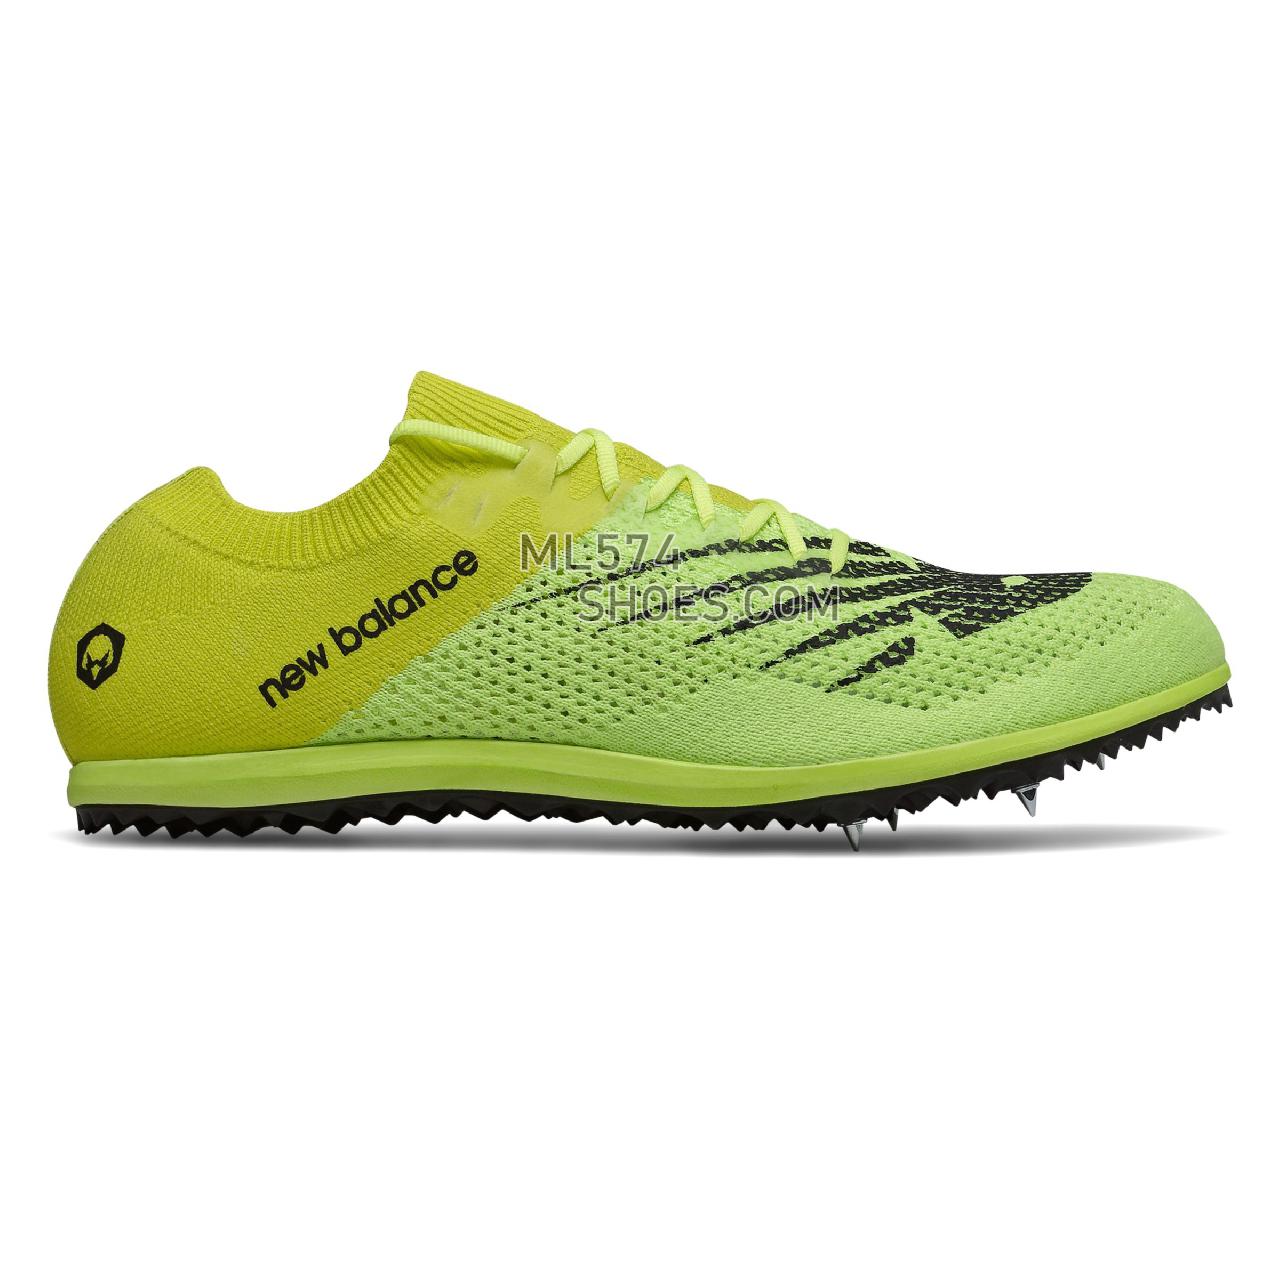 New Balance LD5K v7 - Men's Race Running - Bleached Lime Glo with Sulphur Yellow and Black - MLD5KYB7